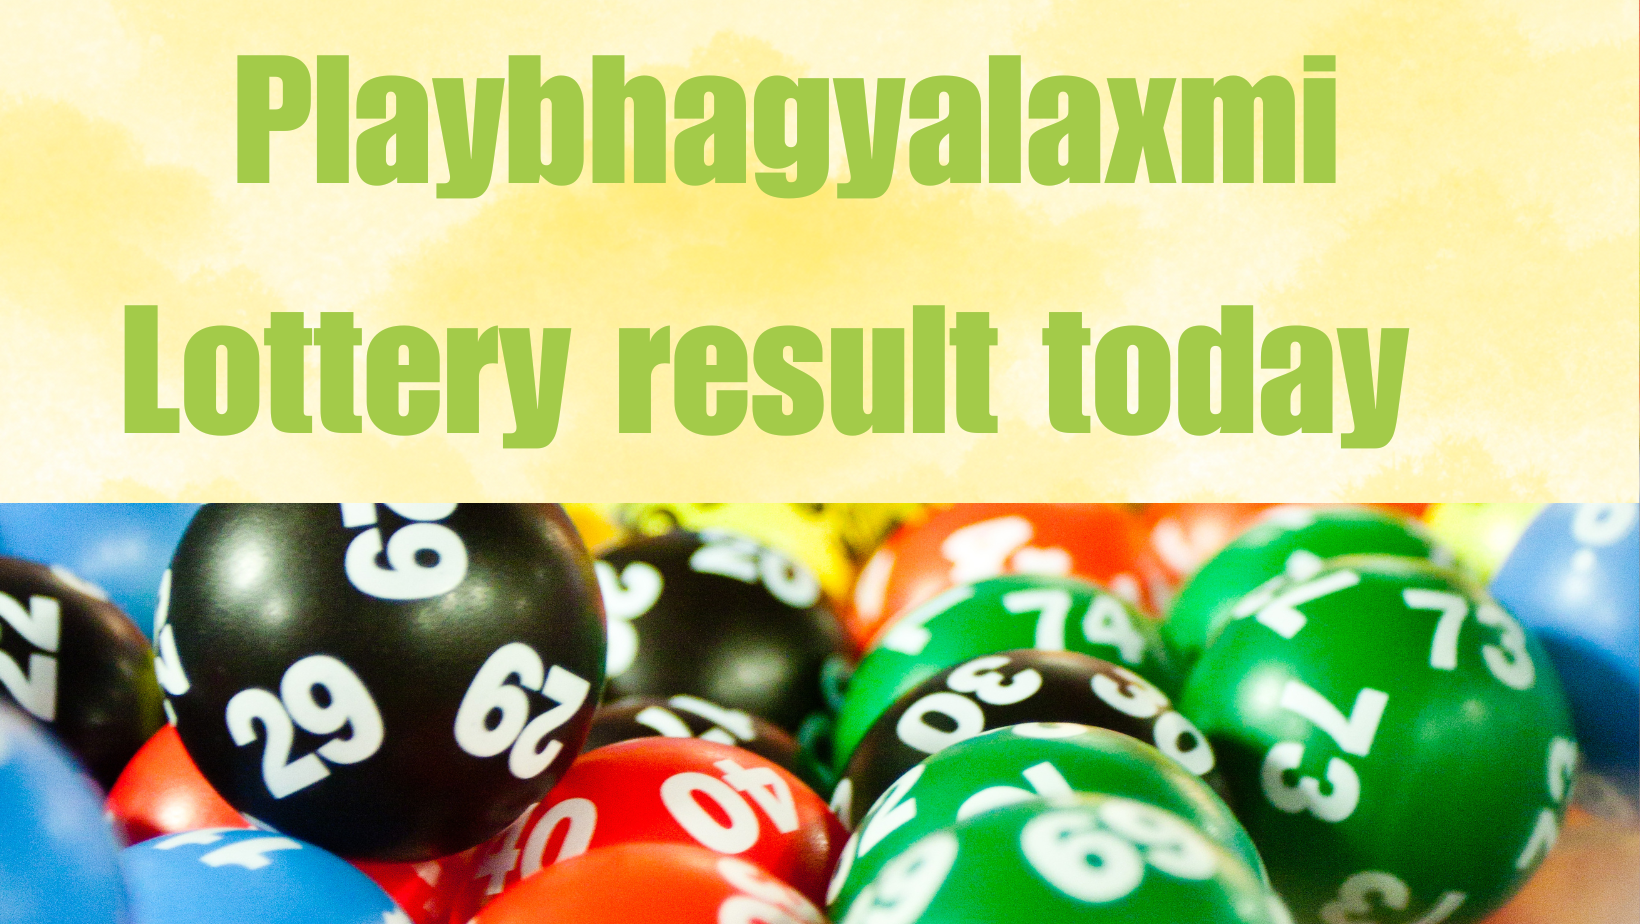 Pink Minimal Aesthetic Business Name Facebook Cover Playbhagyalaxmi Lottery Result 17-05-2024 Live Update